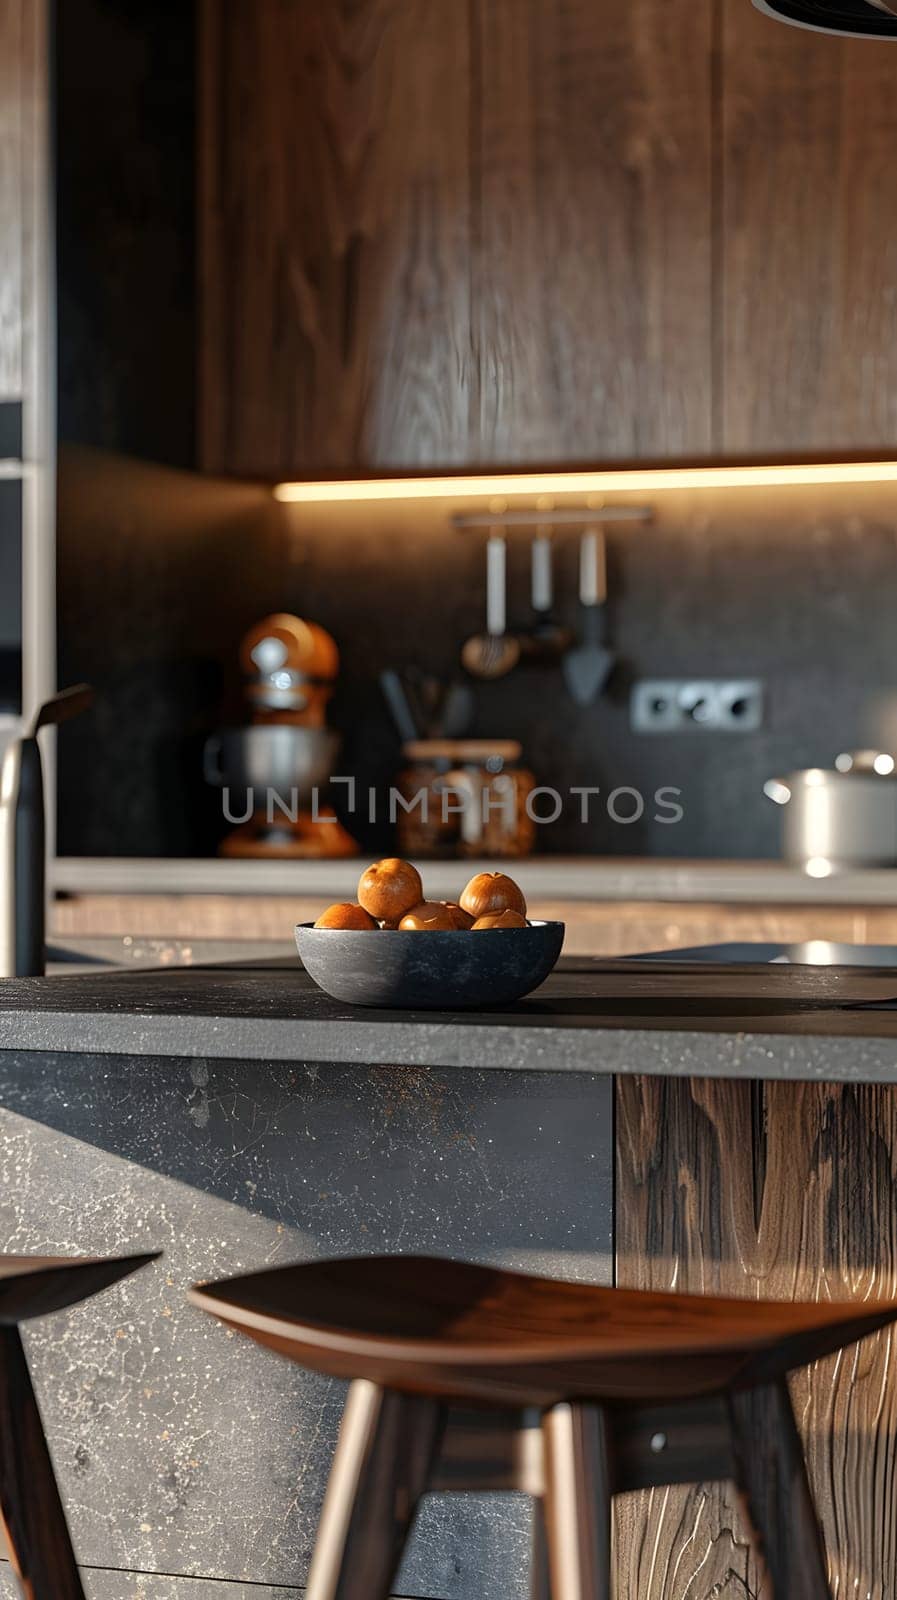 A kitchen with hardwood table and stools, featuring a bowl of oranges. The wood stain gives a warm and inviting vibe to the overall kitchen decor